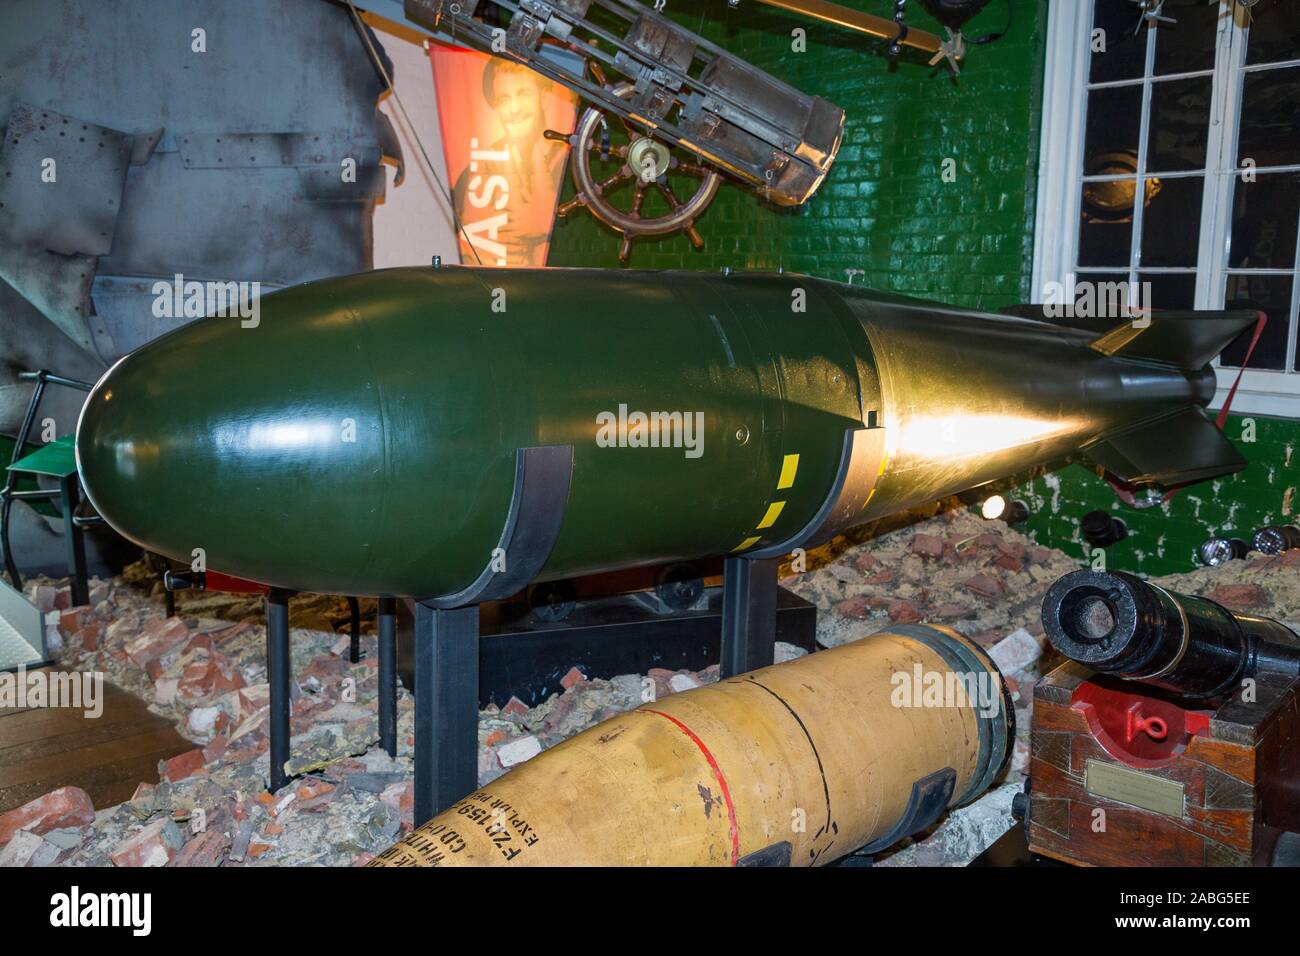 British Red Beard atomic bomb nuclear weapon (green and large) at the Explosion Museum of Naval Firepower; the Royal Navy's former armaments depot of Priddy's Hard, in in Gosport, near Portsmouth. UK (105) Stock Photo